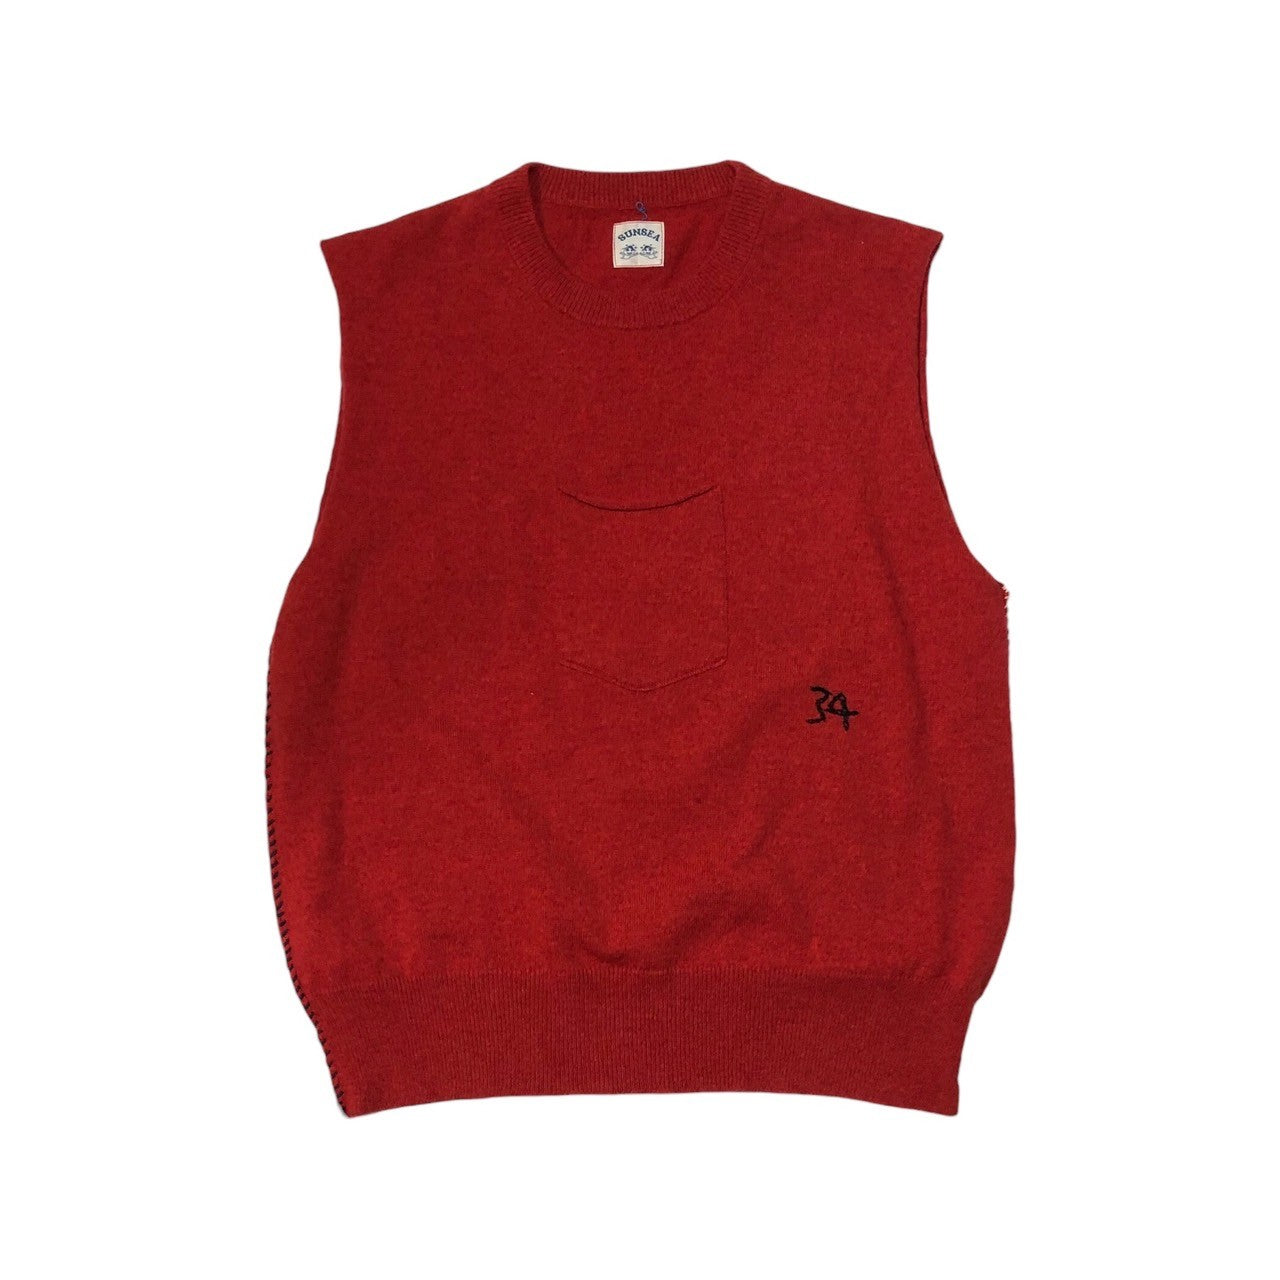 SUNSEA(サンシー) 22AW CASHMERE POCKET VEST カシミア ポケット ベスト 22A54 SIZE 3(L) レッド